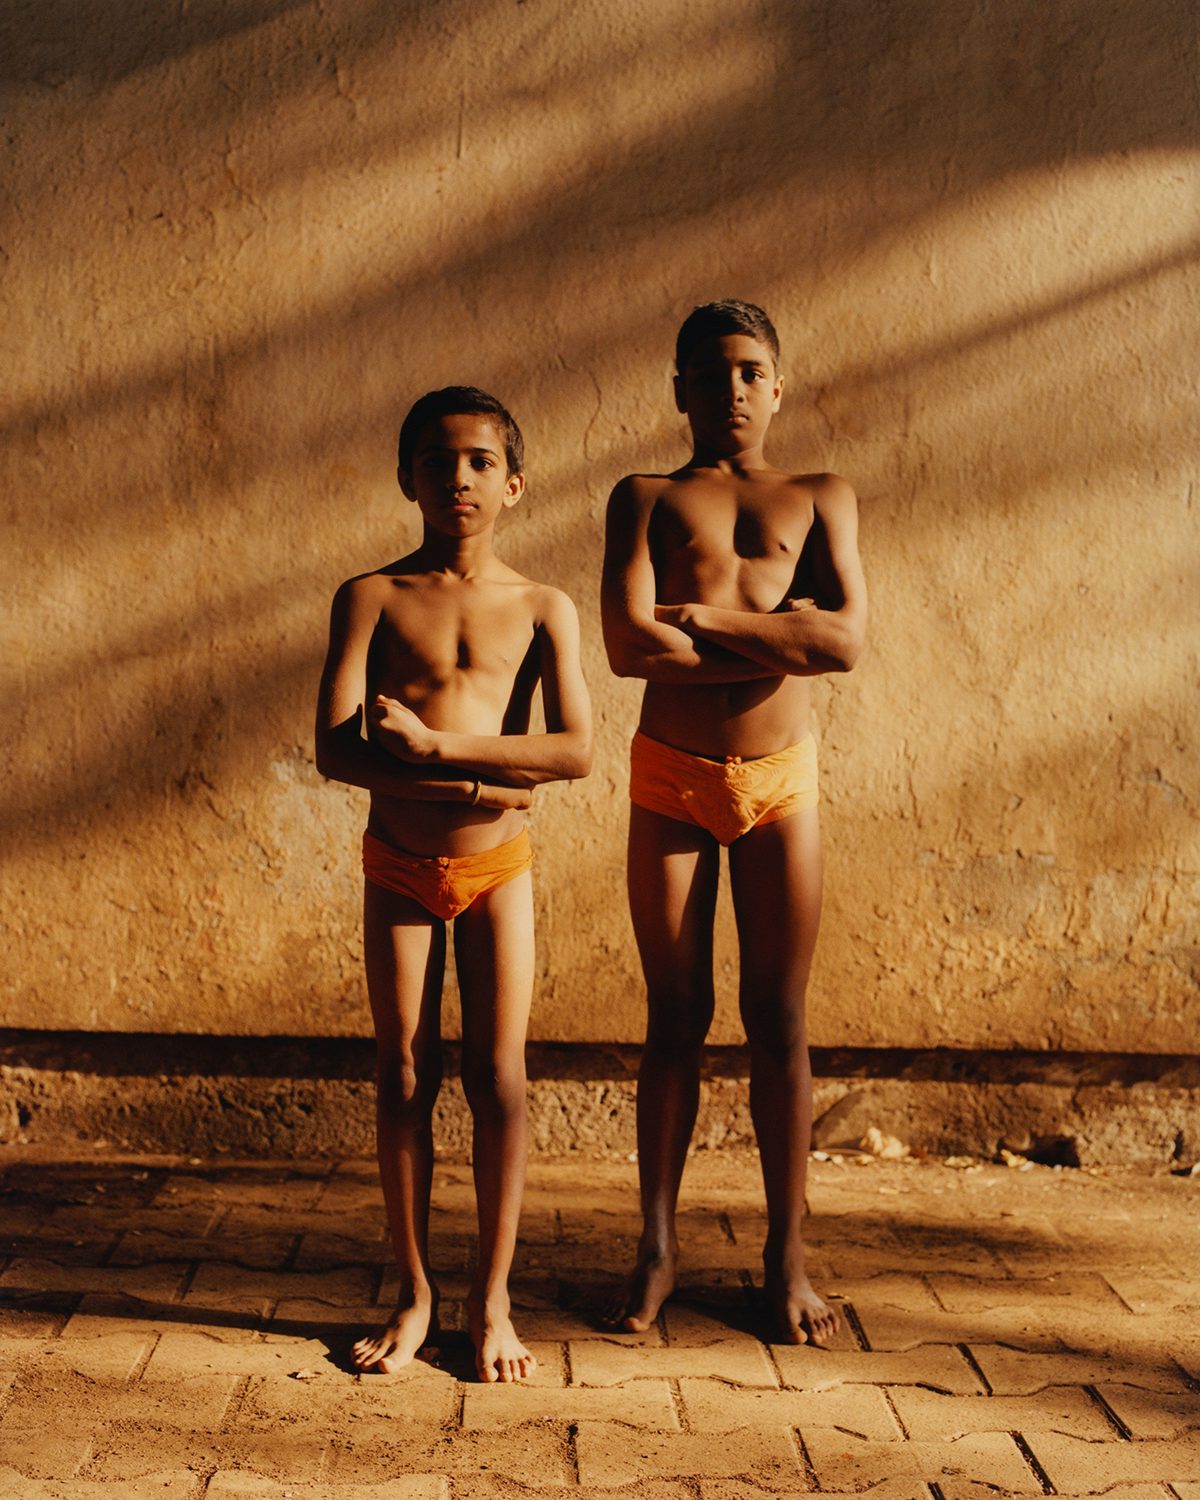 Photograph of two young people who practise Mallakhamb in Vivek Vadoliya's book